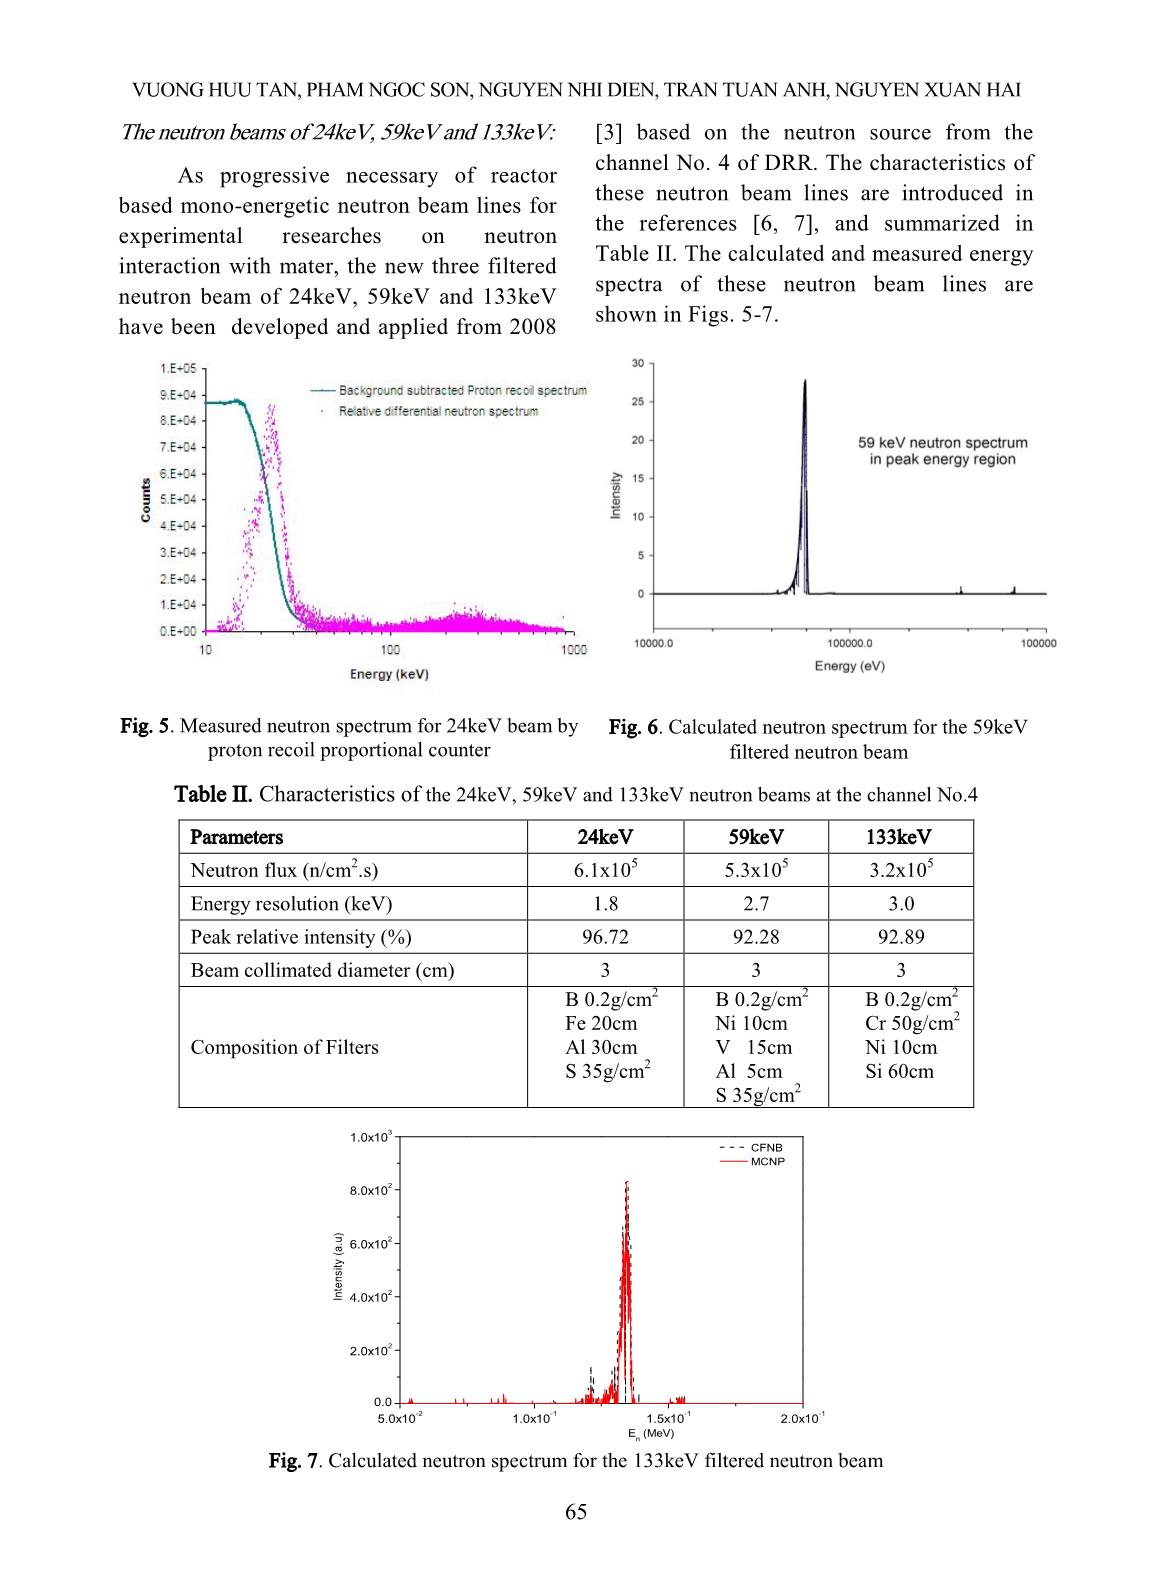 Progress of filtered neutron beams development and applications at the horizontal channels No.2 and No.4 of Dalat nuclear research reactor trang 4